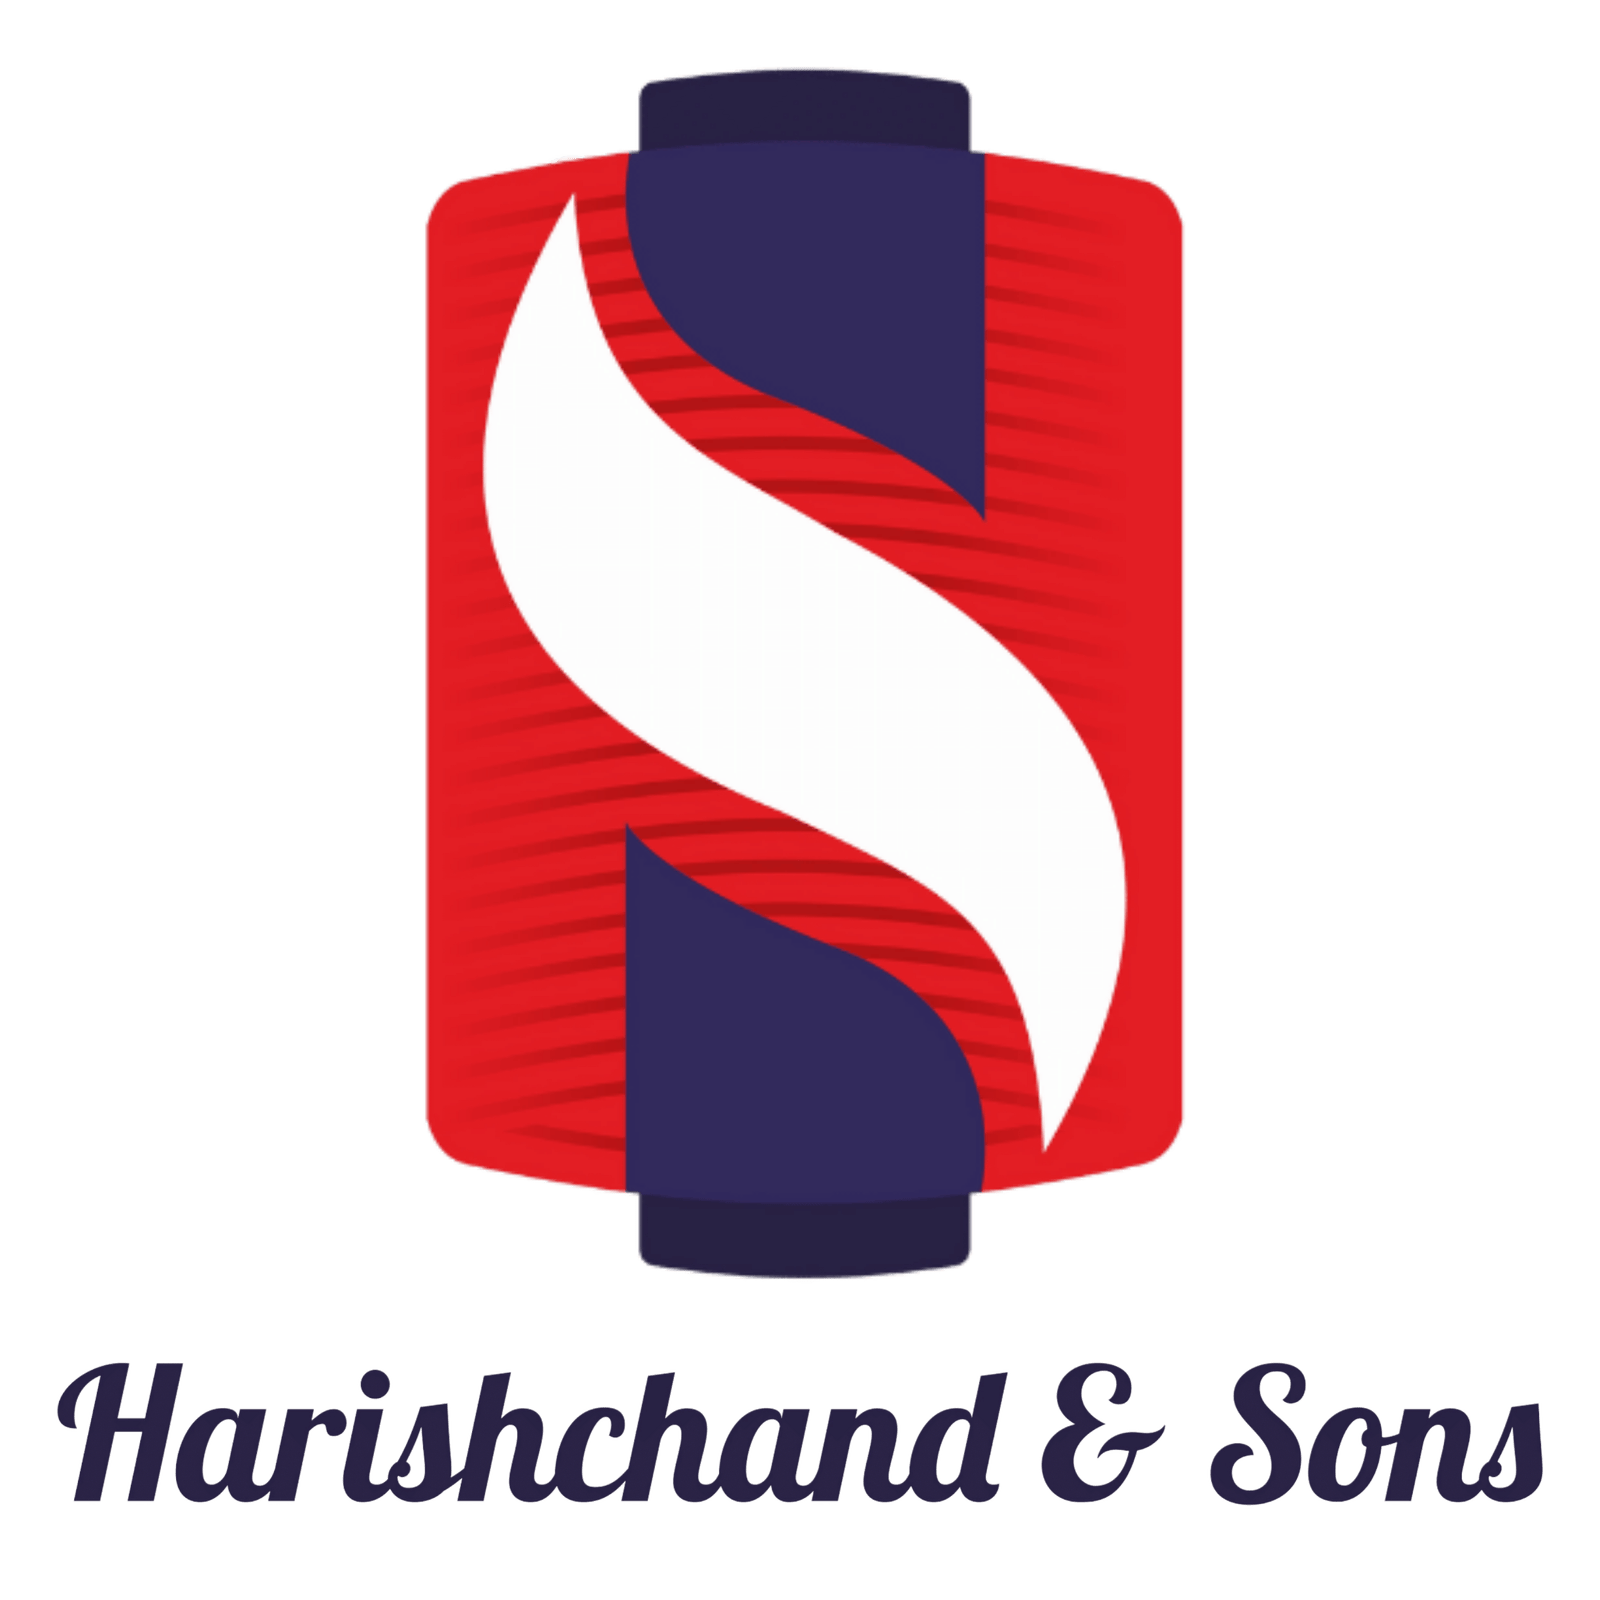 Harish Chand and Sons